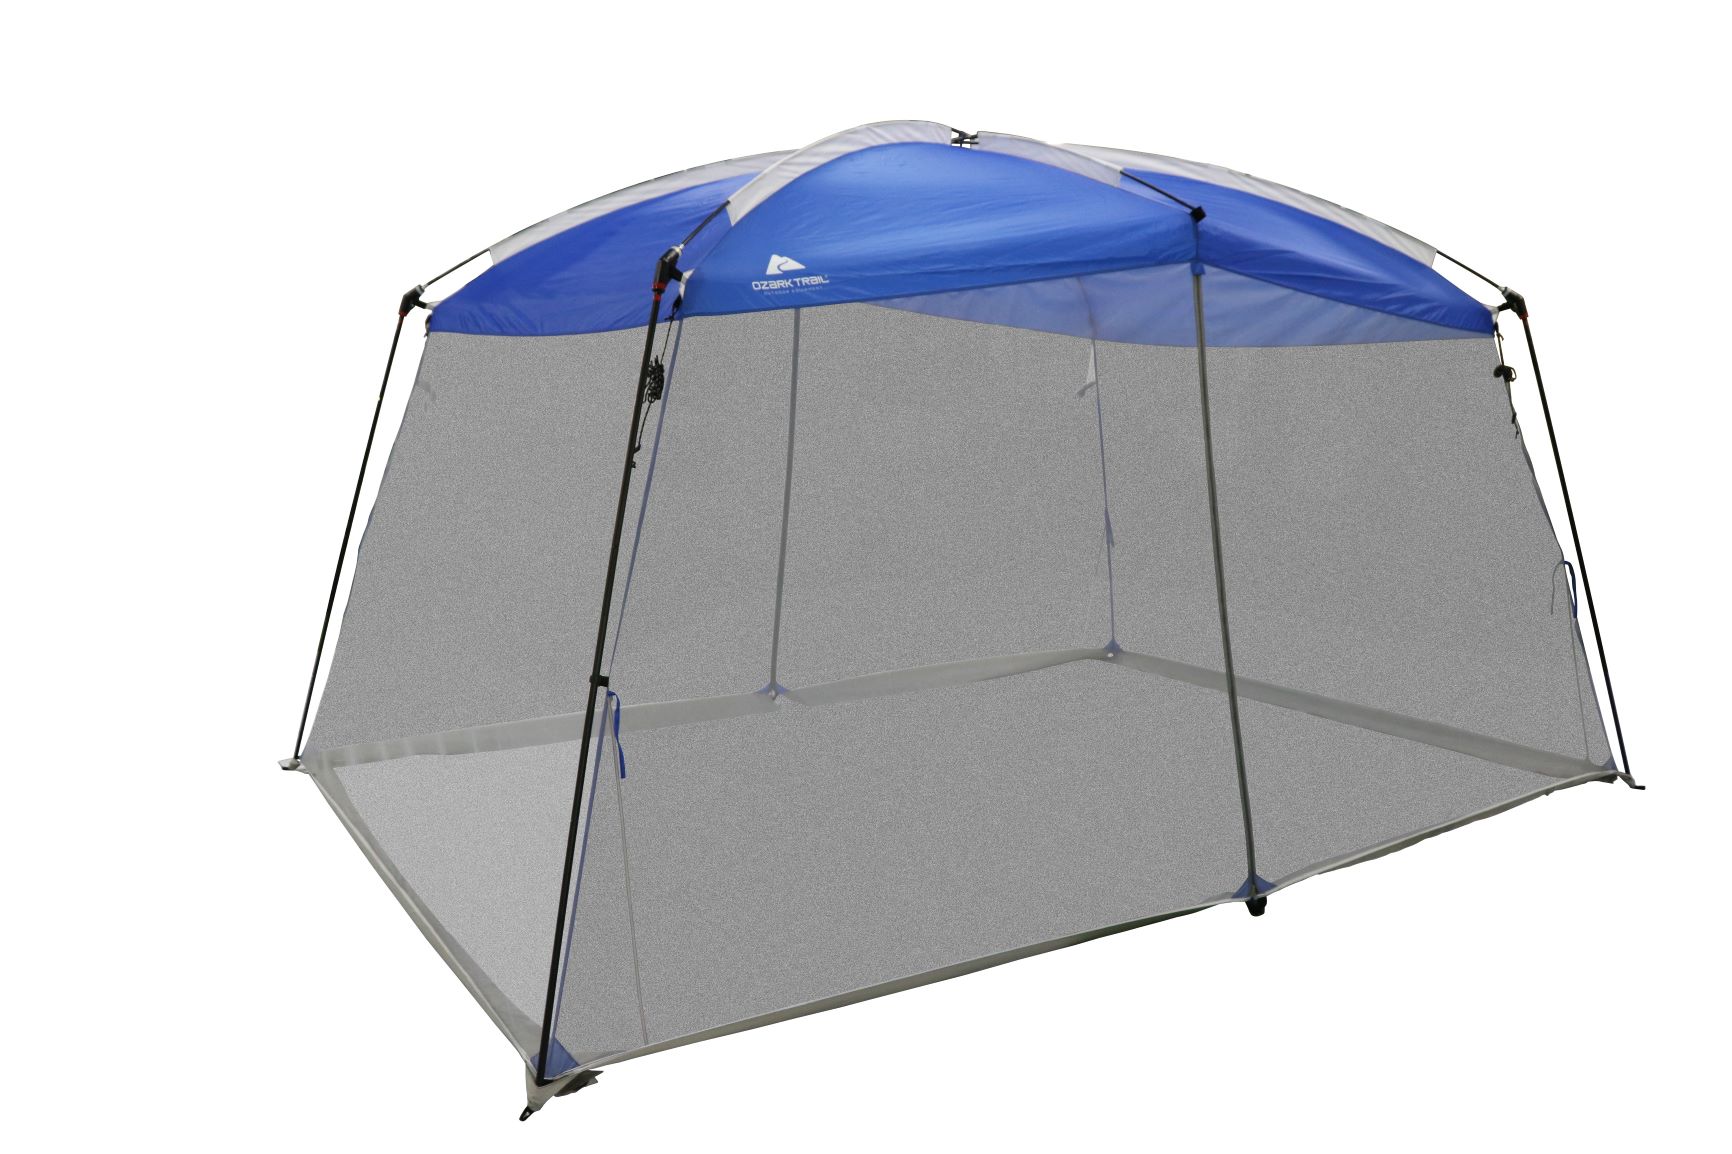 Ozark Trail Screen House Tent, Blue, 13 ft x 9 ft x 84 in - image 1 of 8